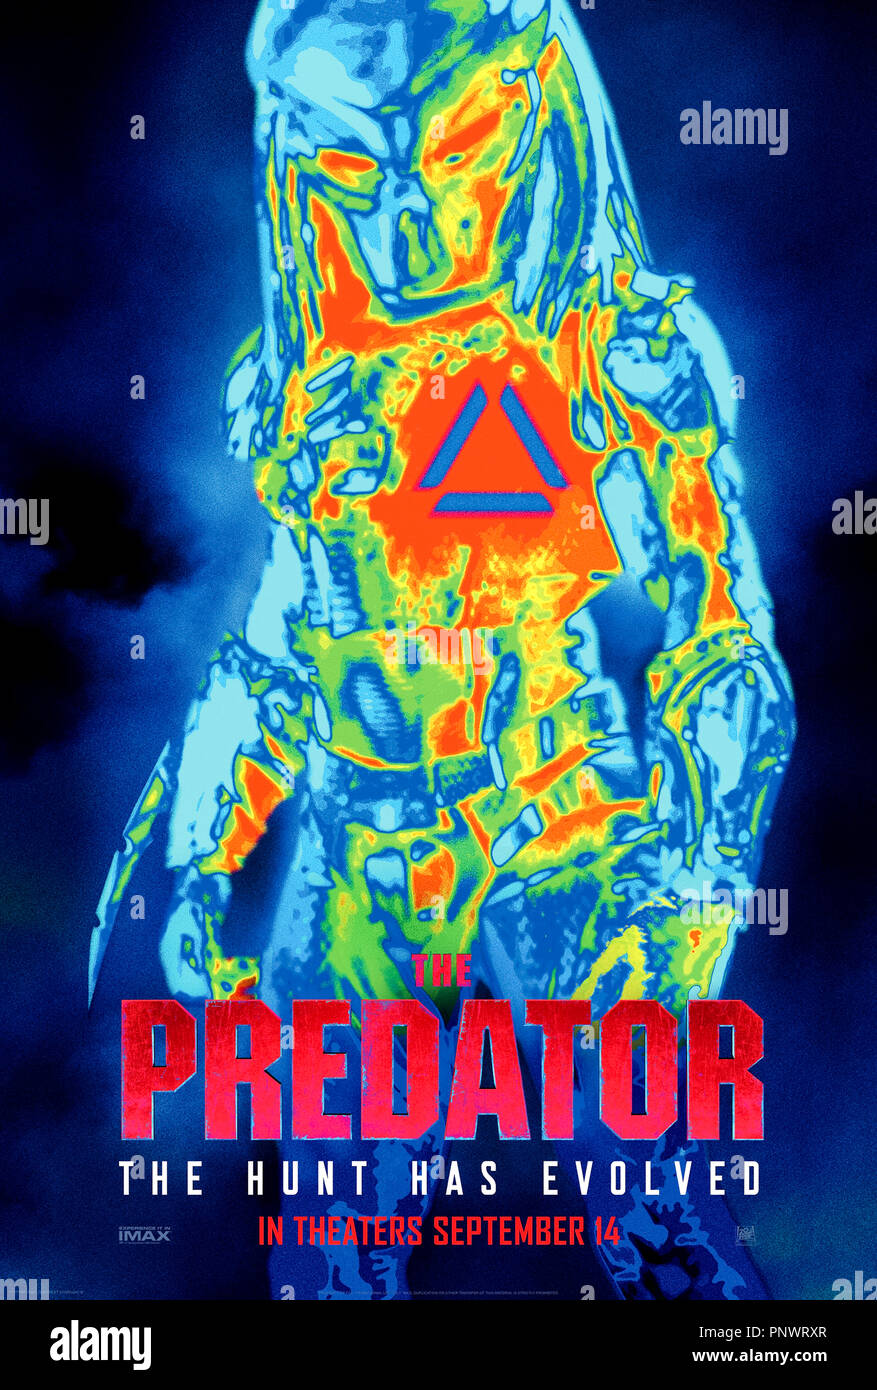 The Predator (2018) directed by Shane Black and starring Boyd Holbrook, Trevante Rhodes, Jacob Tremblay and Keegan-Michael Key. The Predator returns for the hunt with a genetic upgrade. Stock Photo